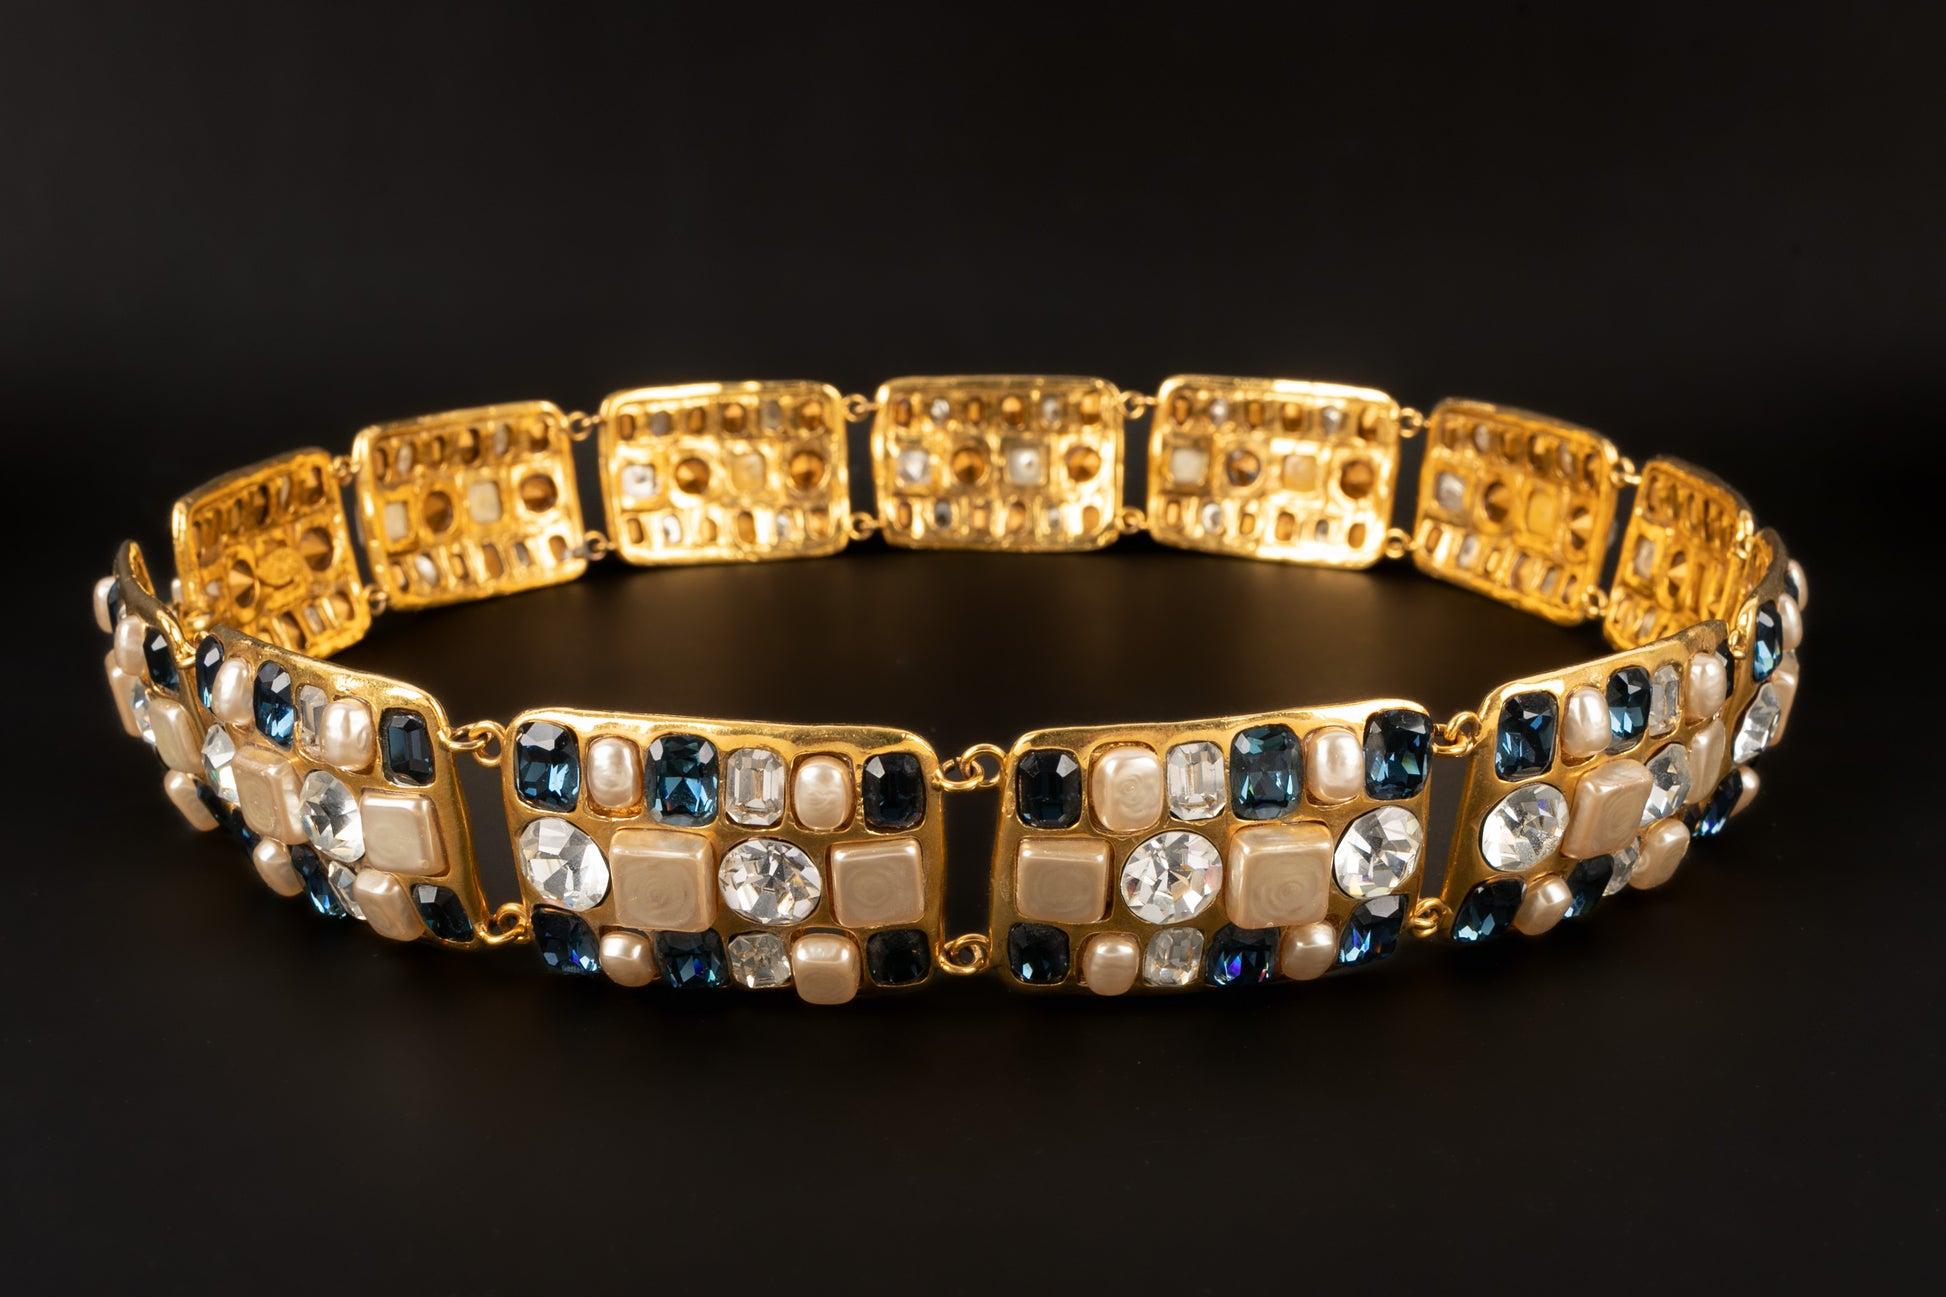 Chanel - (Made in France) Golden metal belt ornamented with rhinestones and costume pearly cabochons. 2cc6 Collection. To be mentioned, some snags on the pearly material.

Additional information: 
Condition: Very good condition
Dimensions: Length: